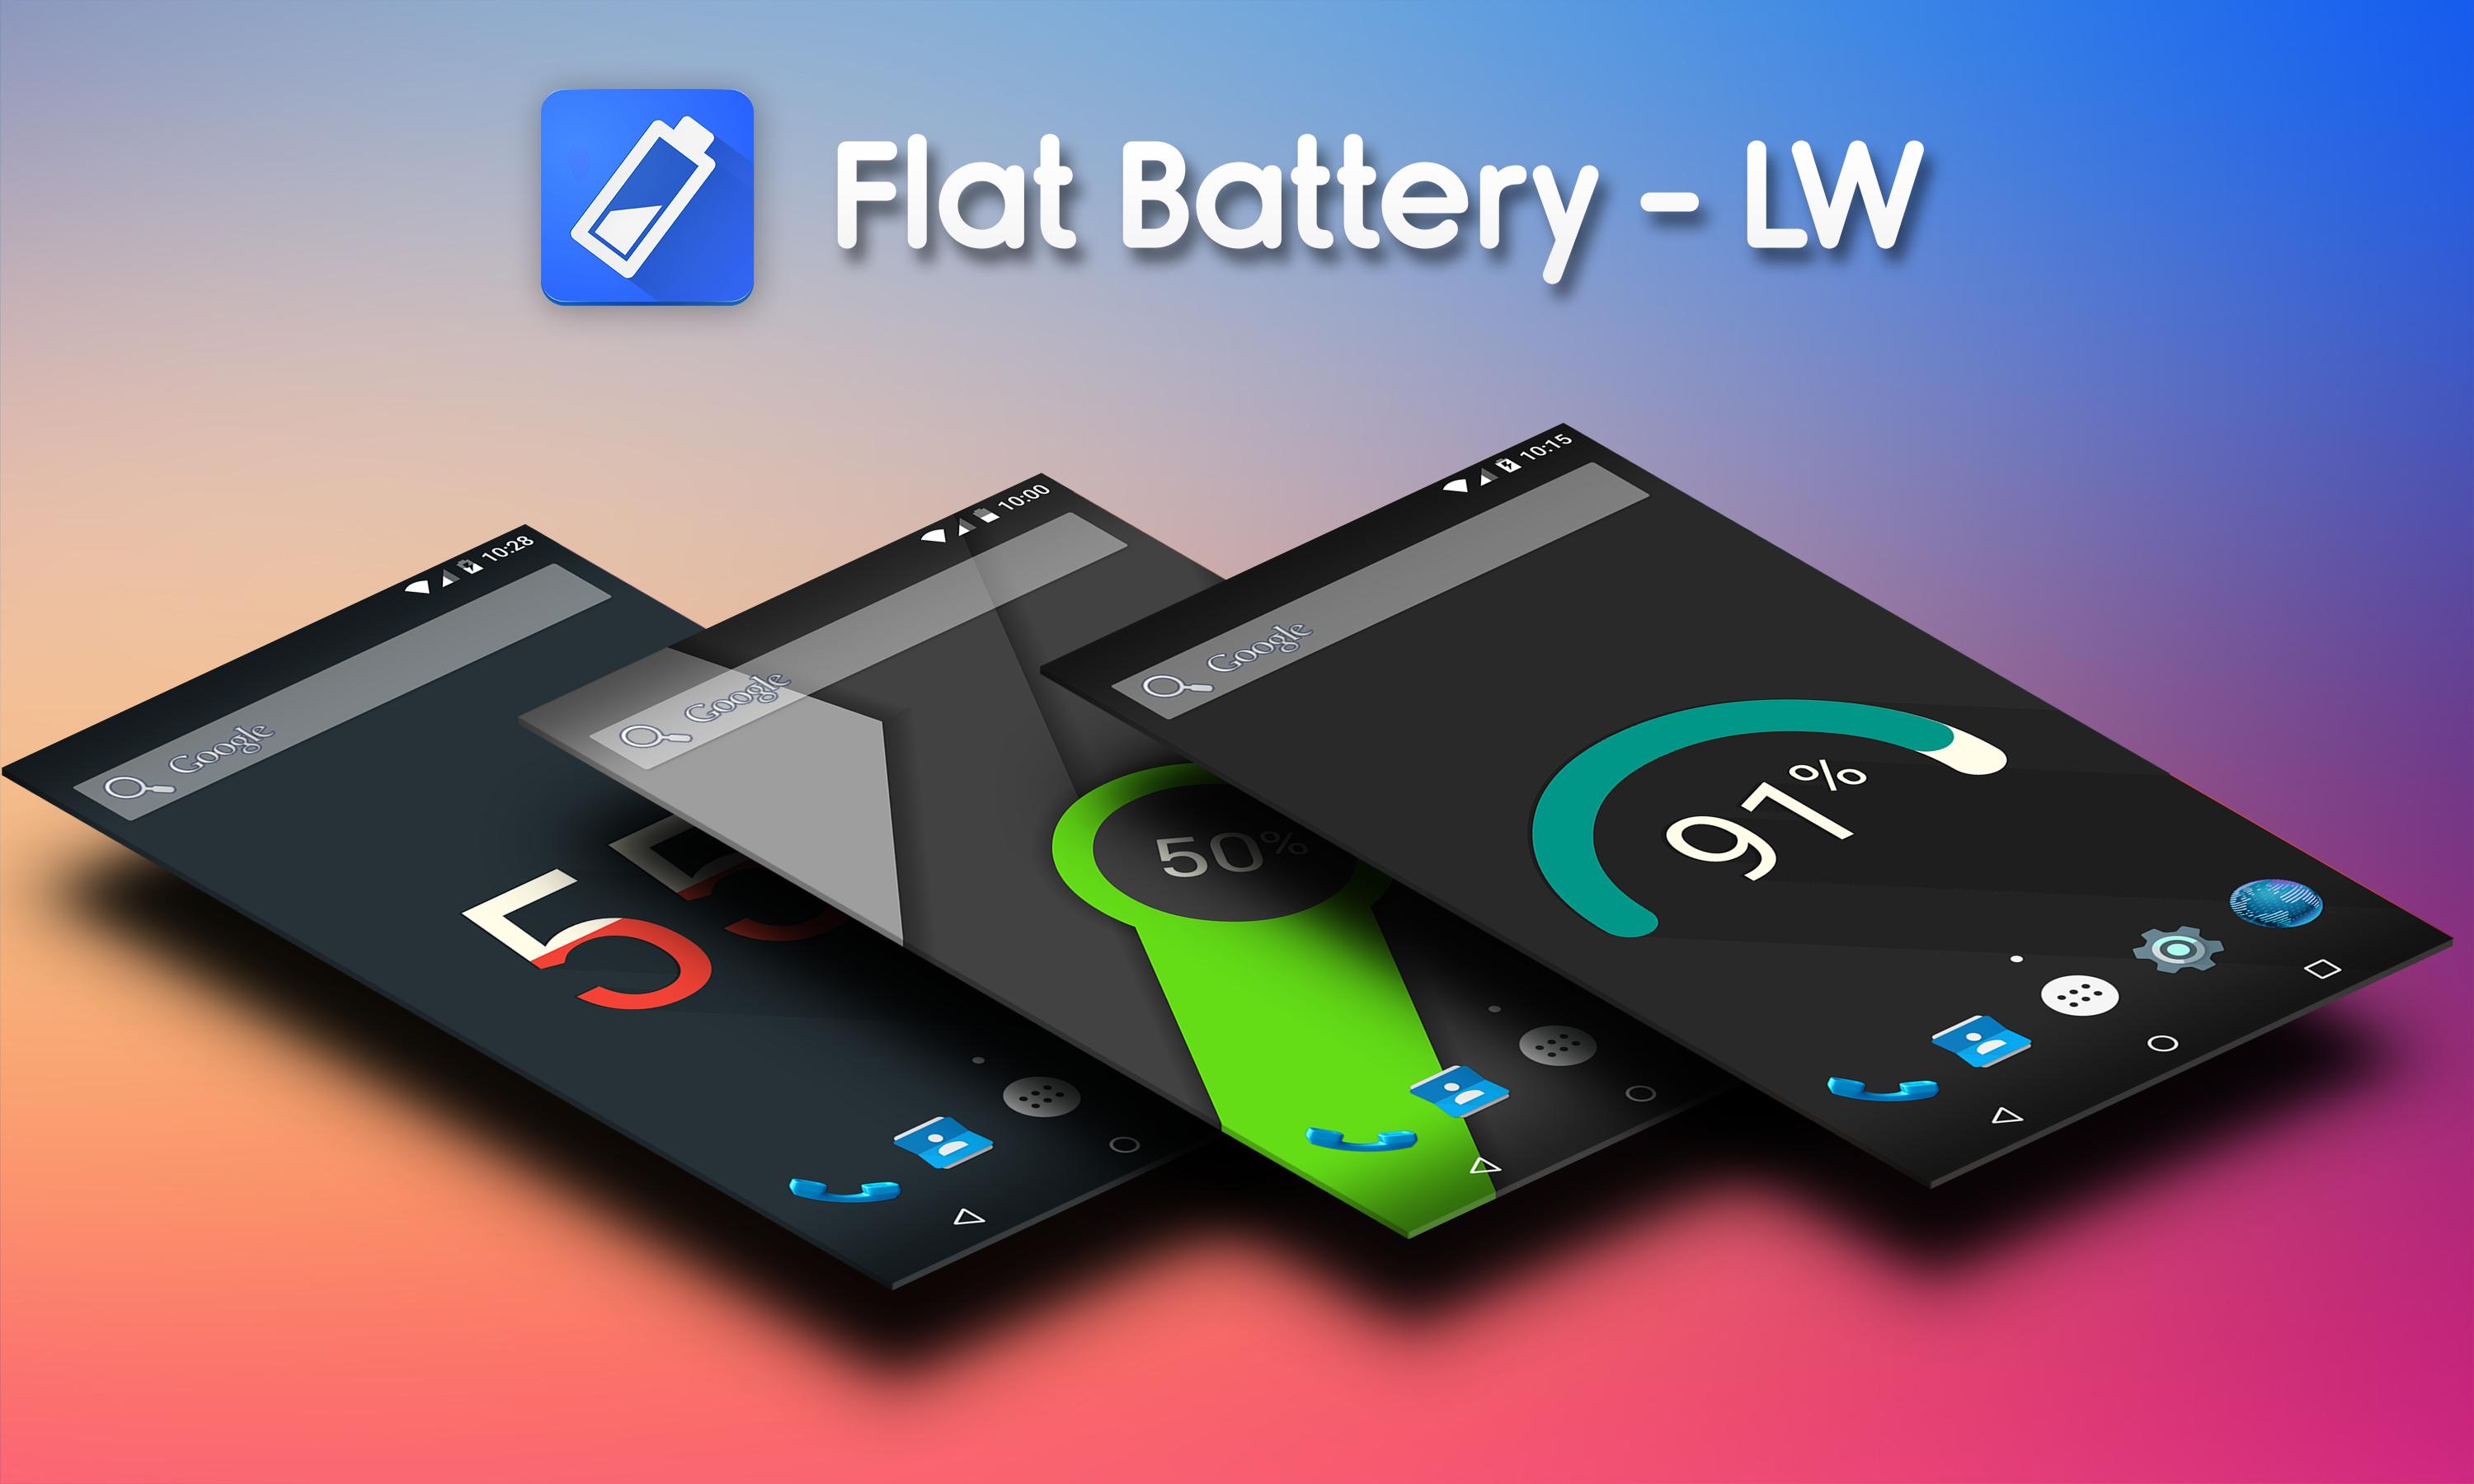 Flat battery. Android живые обои батарея. Flat Battery 5. Virlce Flat Batteries.